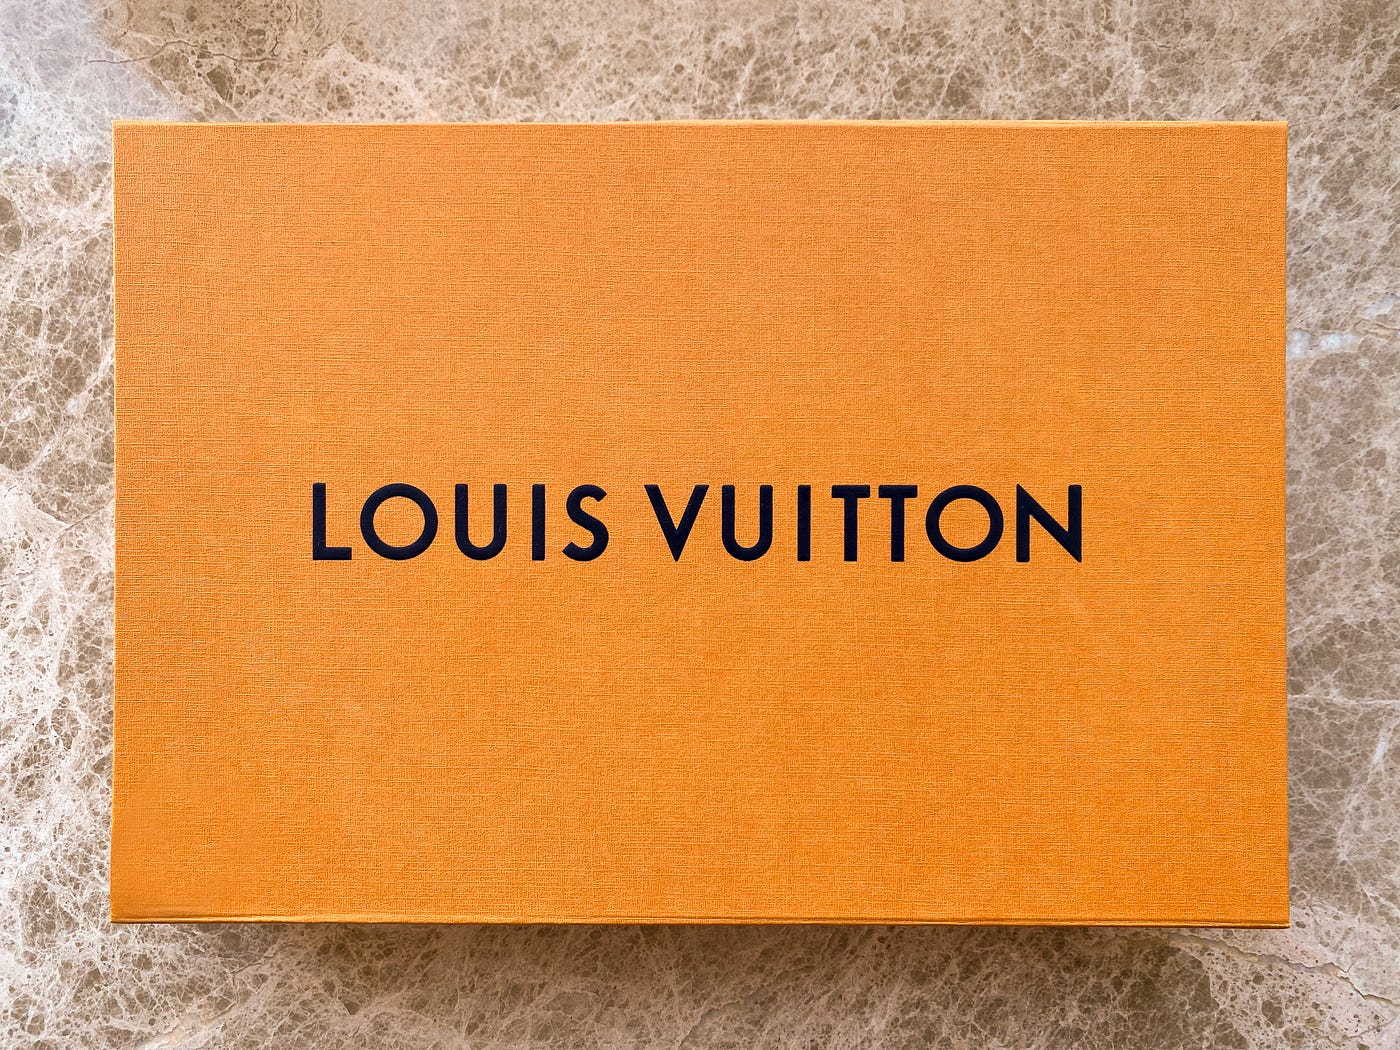 Louis Vuitton NFT's — Get One For Free!